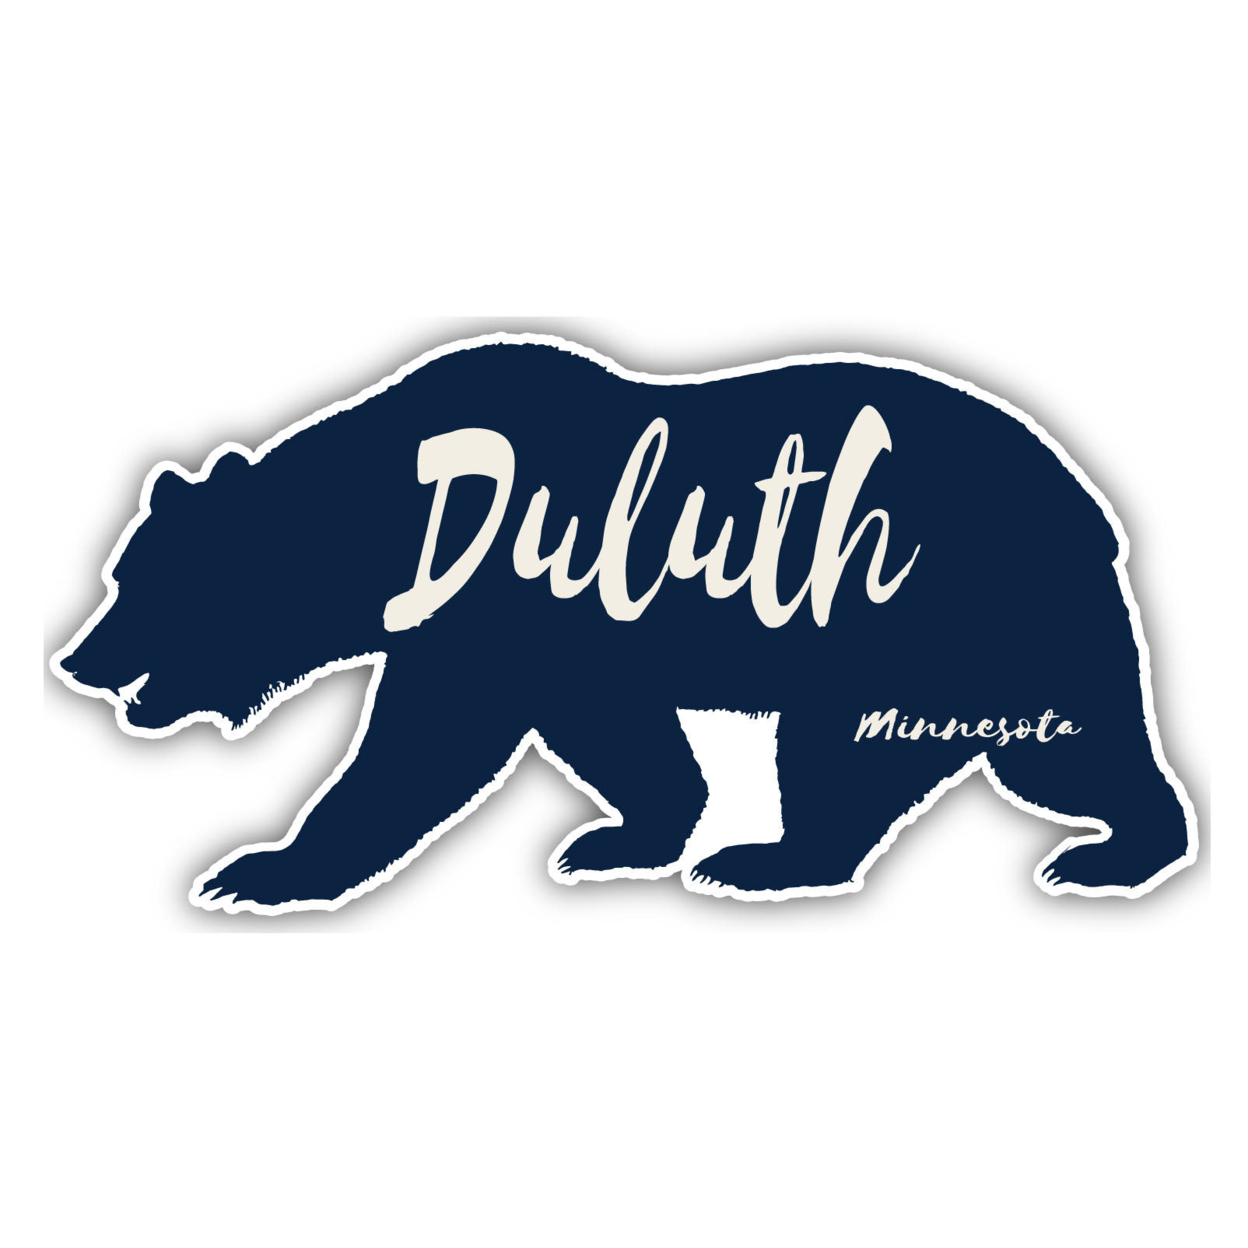 Duluth Minnesota Souvenir Decorative Stickers (Choose Theme And Size) - 4-Pack, 6-Inch, Adventures Awaits